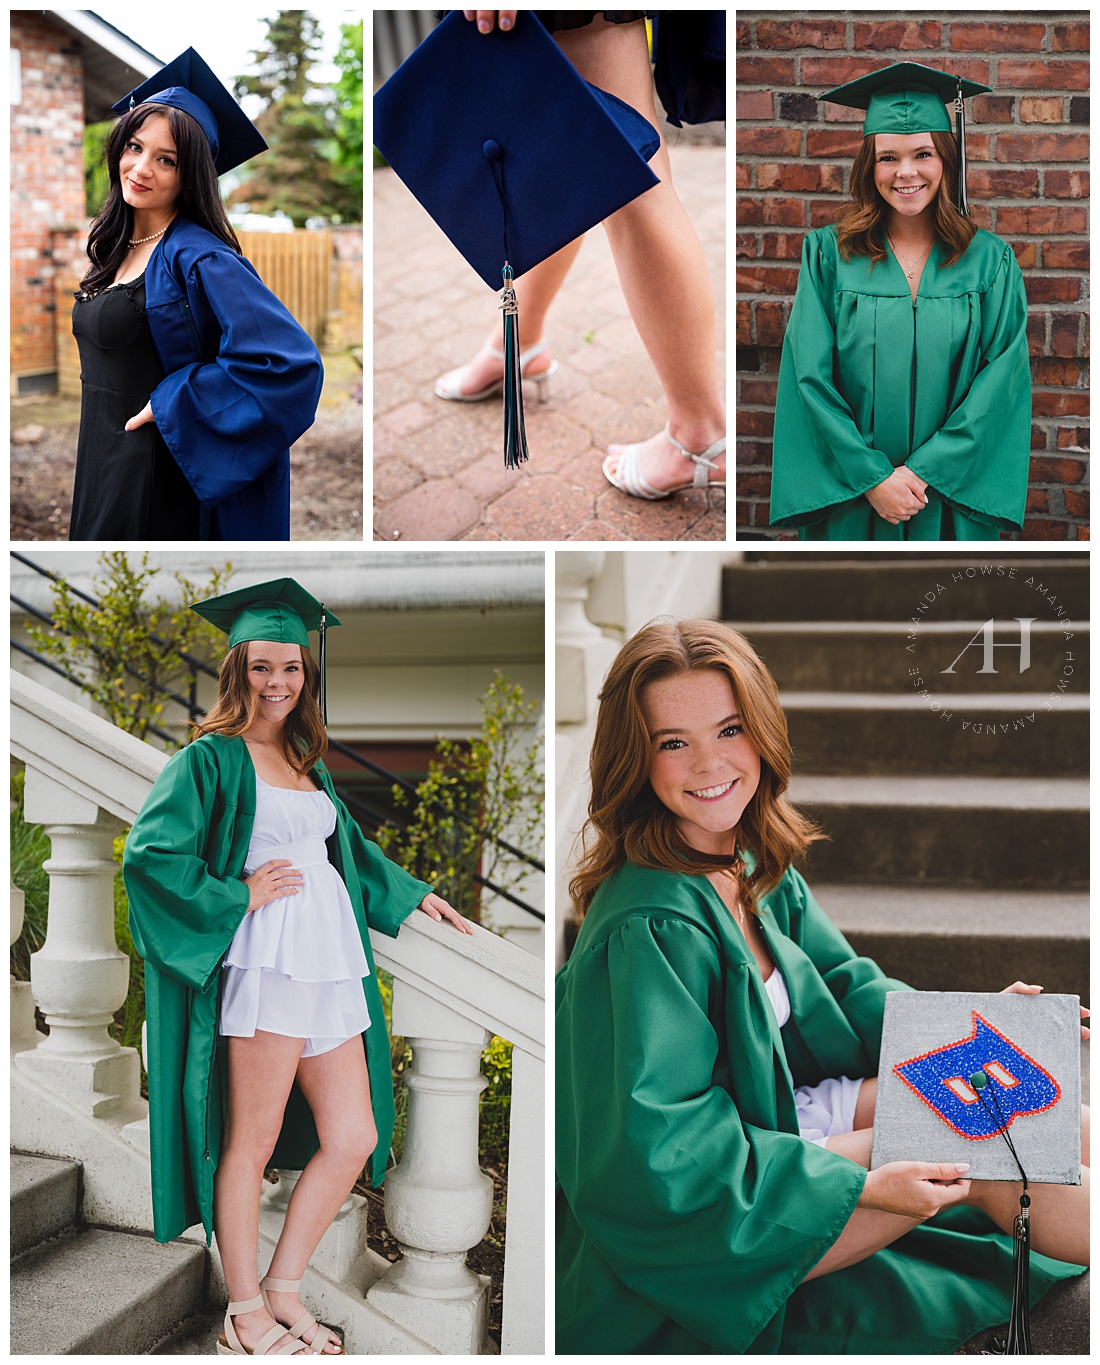 Outdoor Senior Cap and Gown Photos with Cool Backgrounds | Spanish Steps Senior Portraits | Photographed by the Best Tacoma Senior Portrait Photographer Amanda Howse